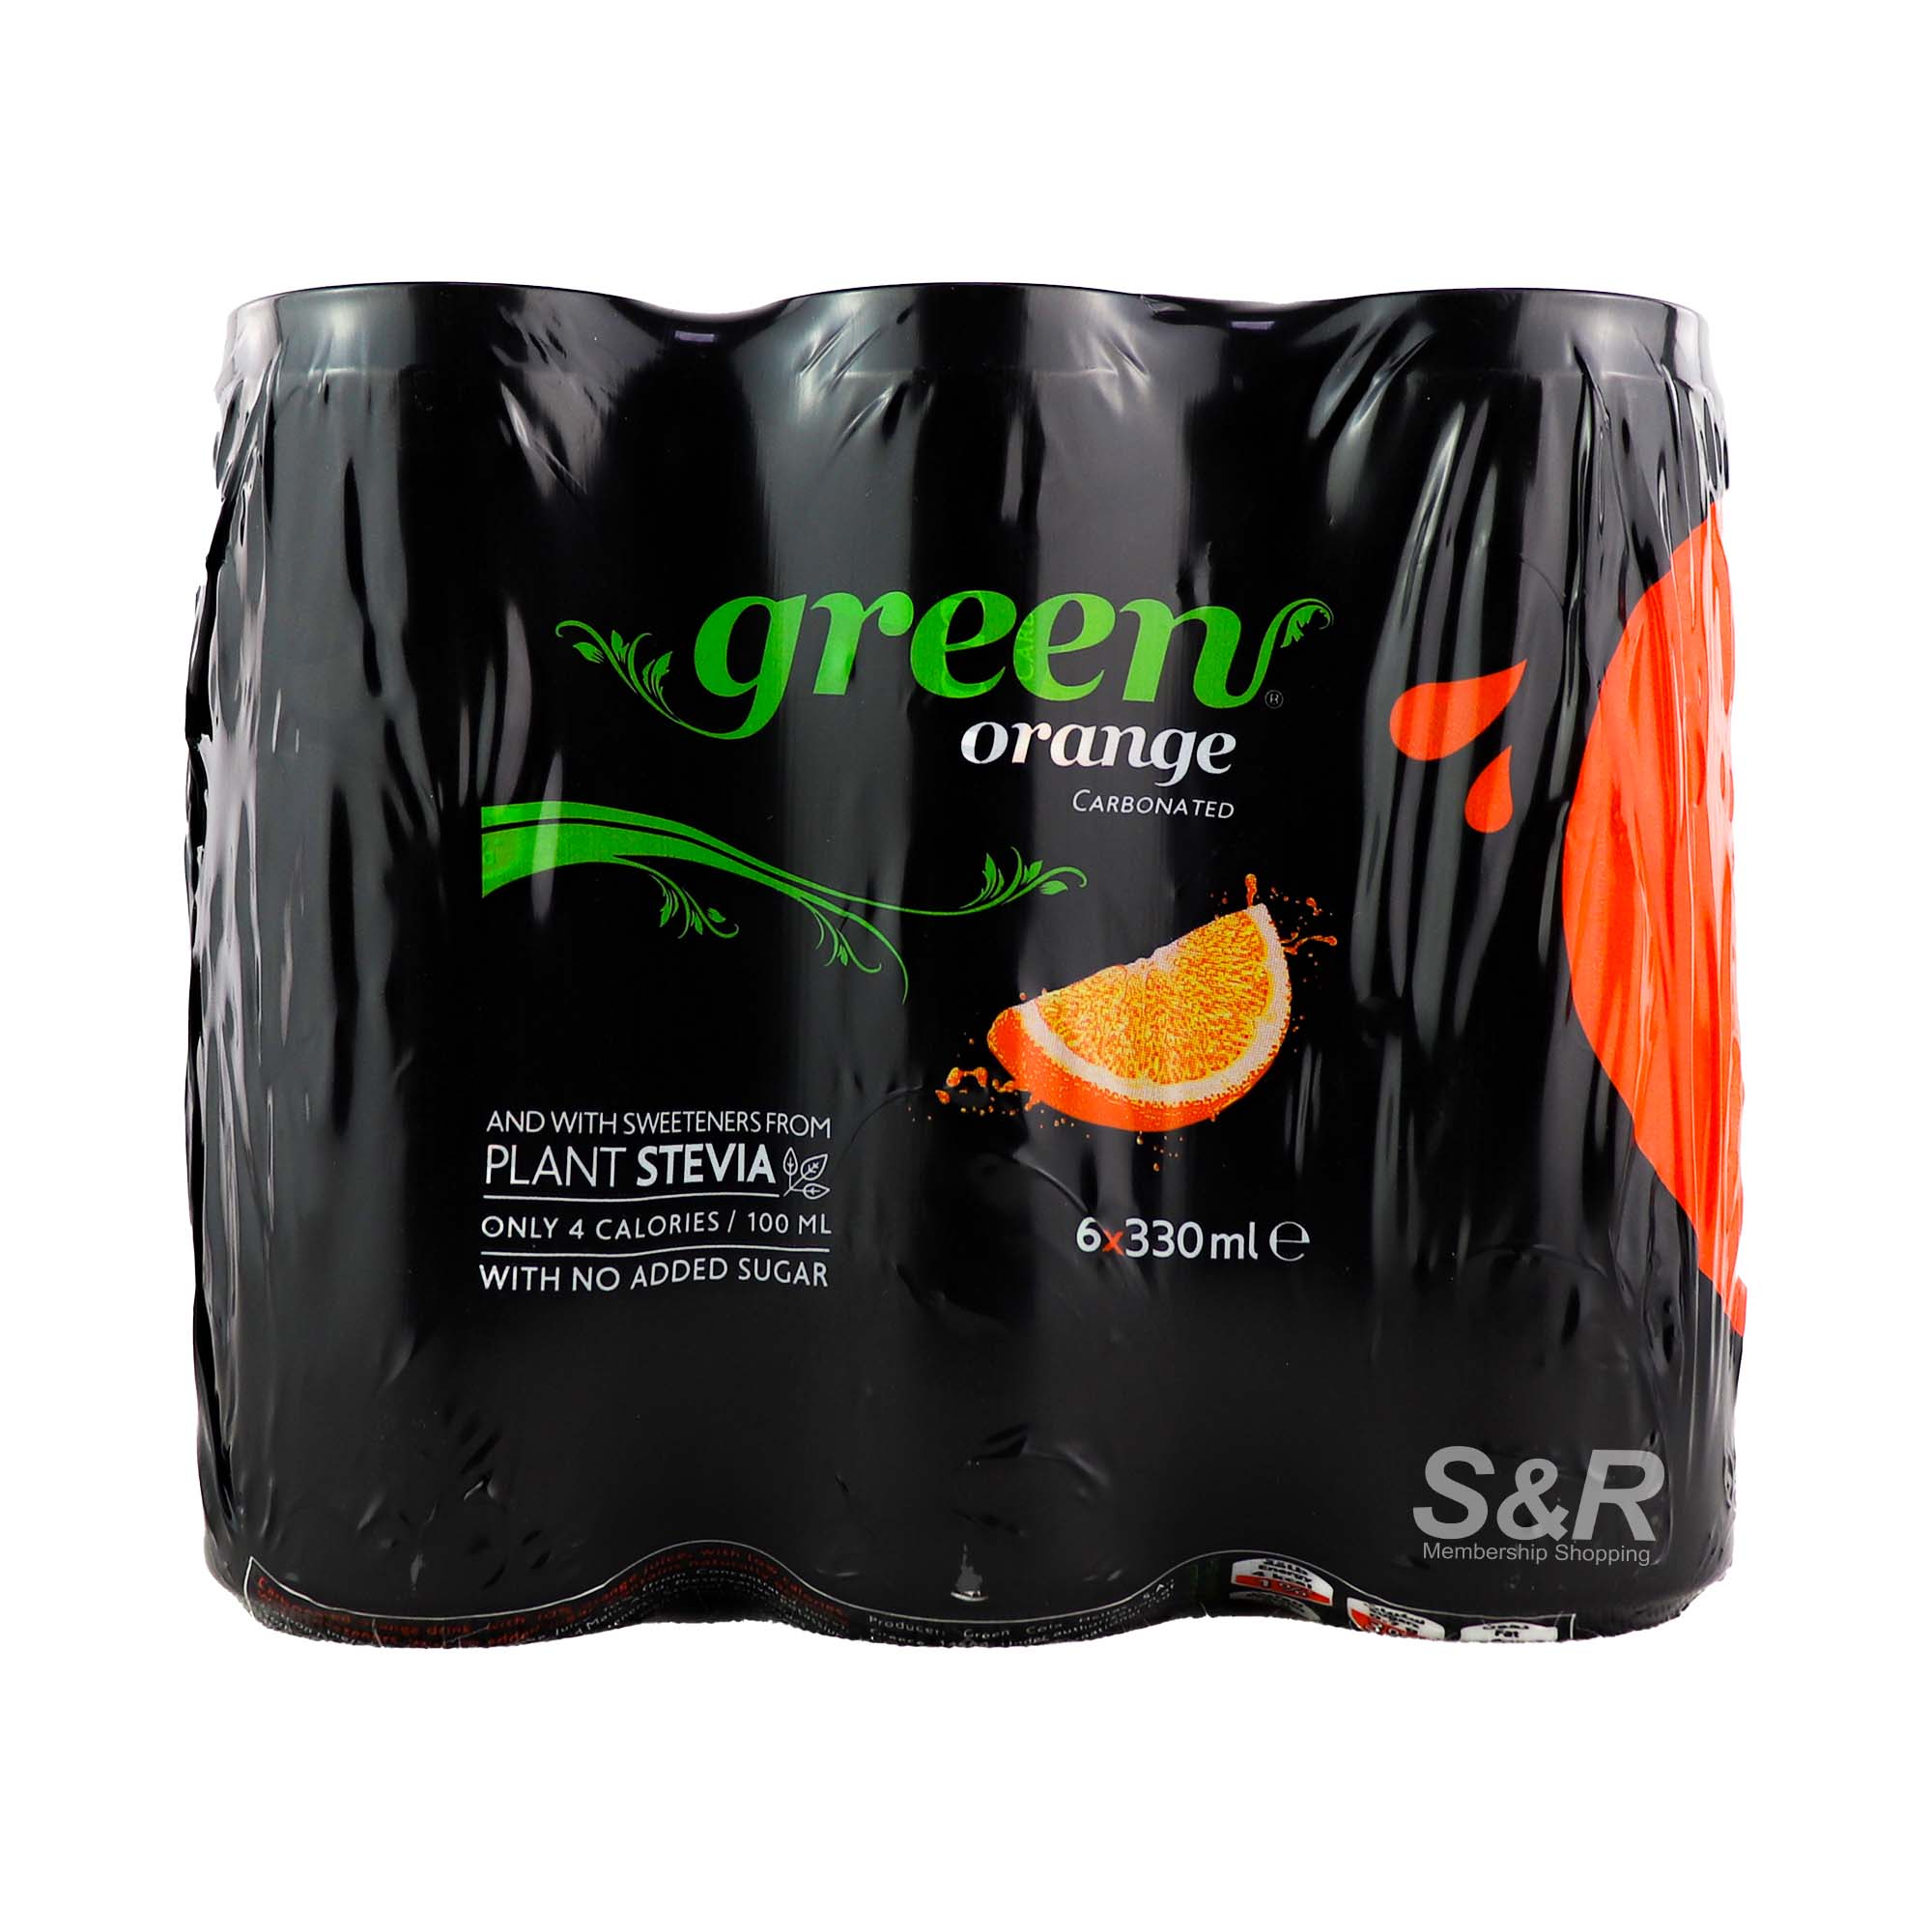 Green Orange Carbonated Drink 6 cans